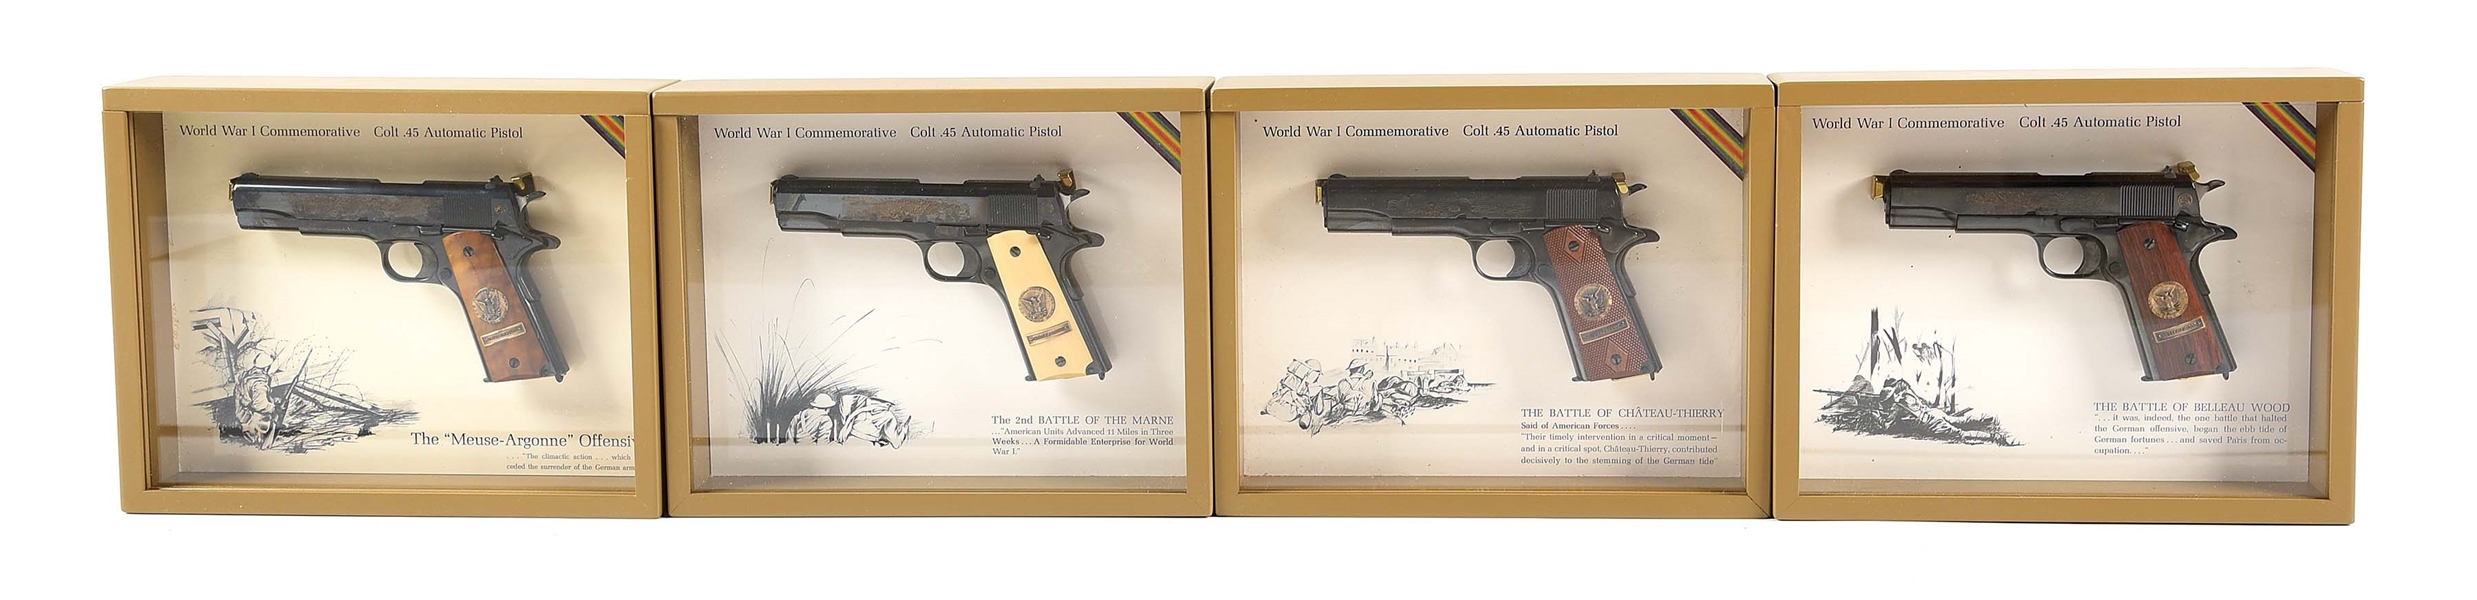 (C) COMPLETE SET OF COLT WORLD WAR I COMMEMORATIVE 1911 PISTOLS, WITH MATCHING SERIAL NUMBERS, AND THREE OF THE ORIGINAL SHIPPING BOXES TO THE SAME LOCATION.